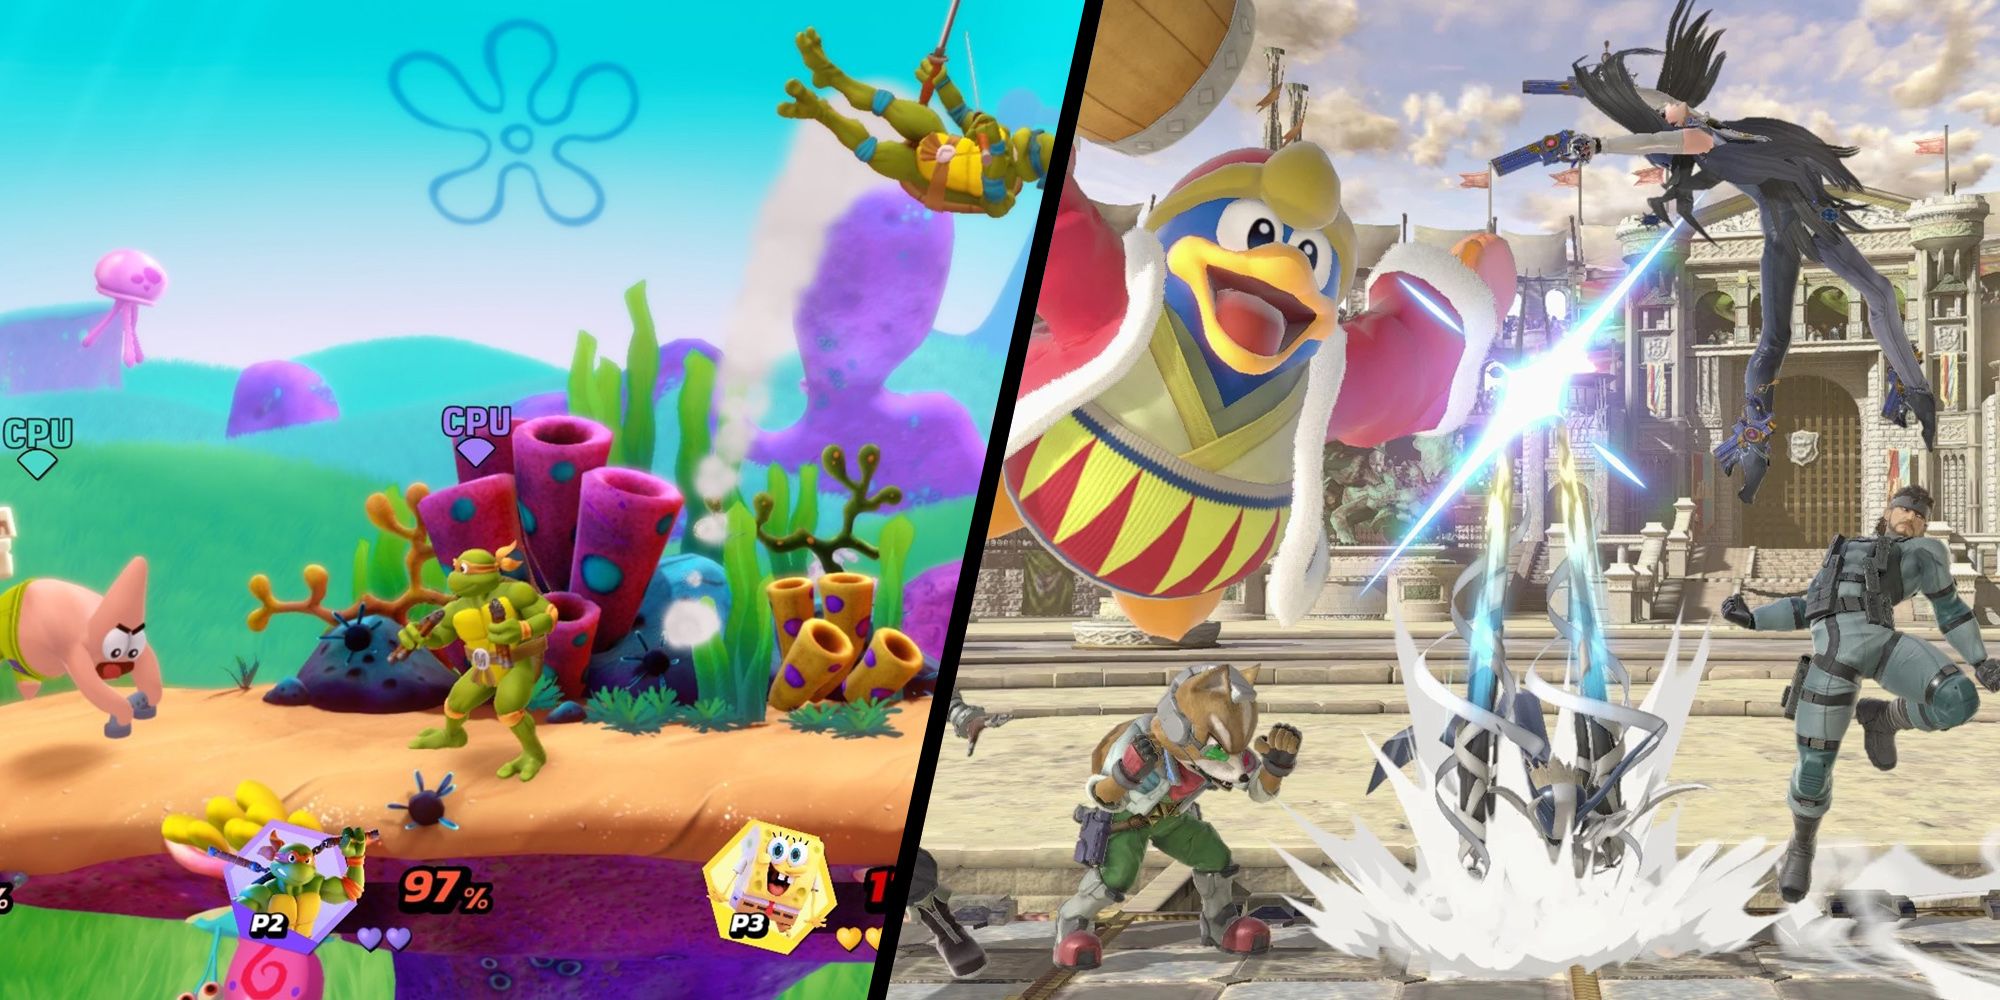 Examples Of Chaotic Matches In Both All-Star Brawl And Smash Ultimate